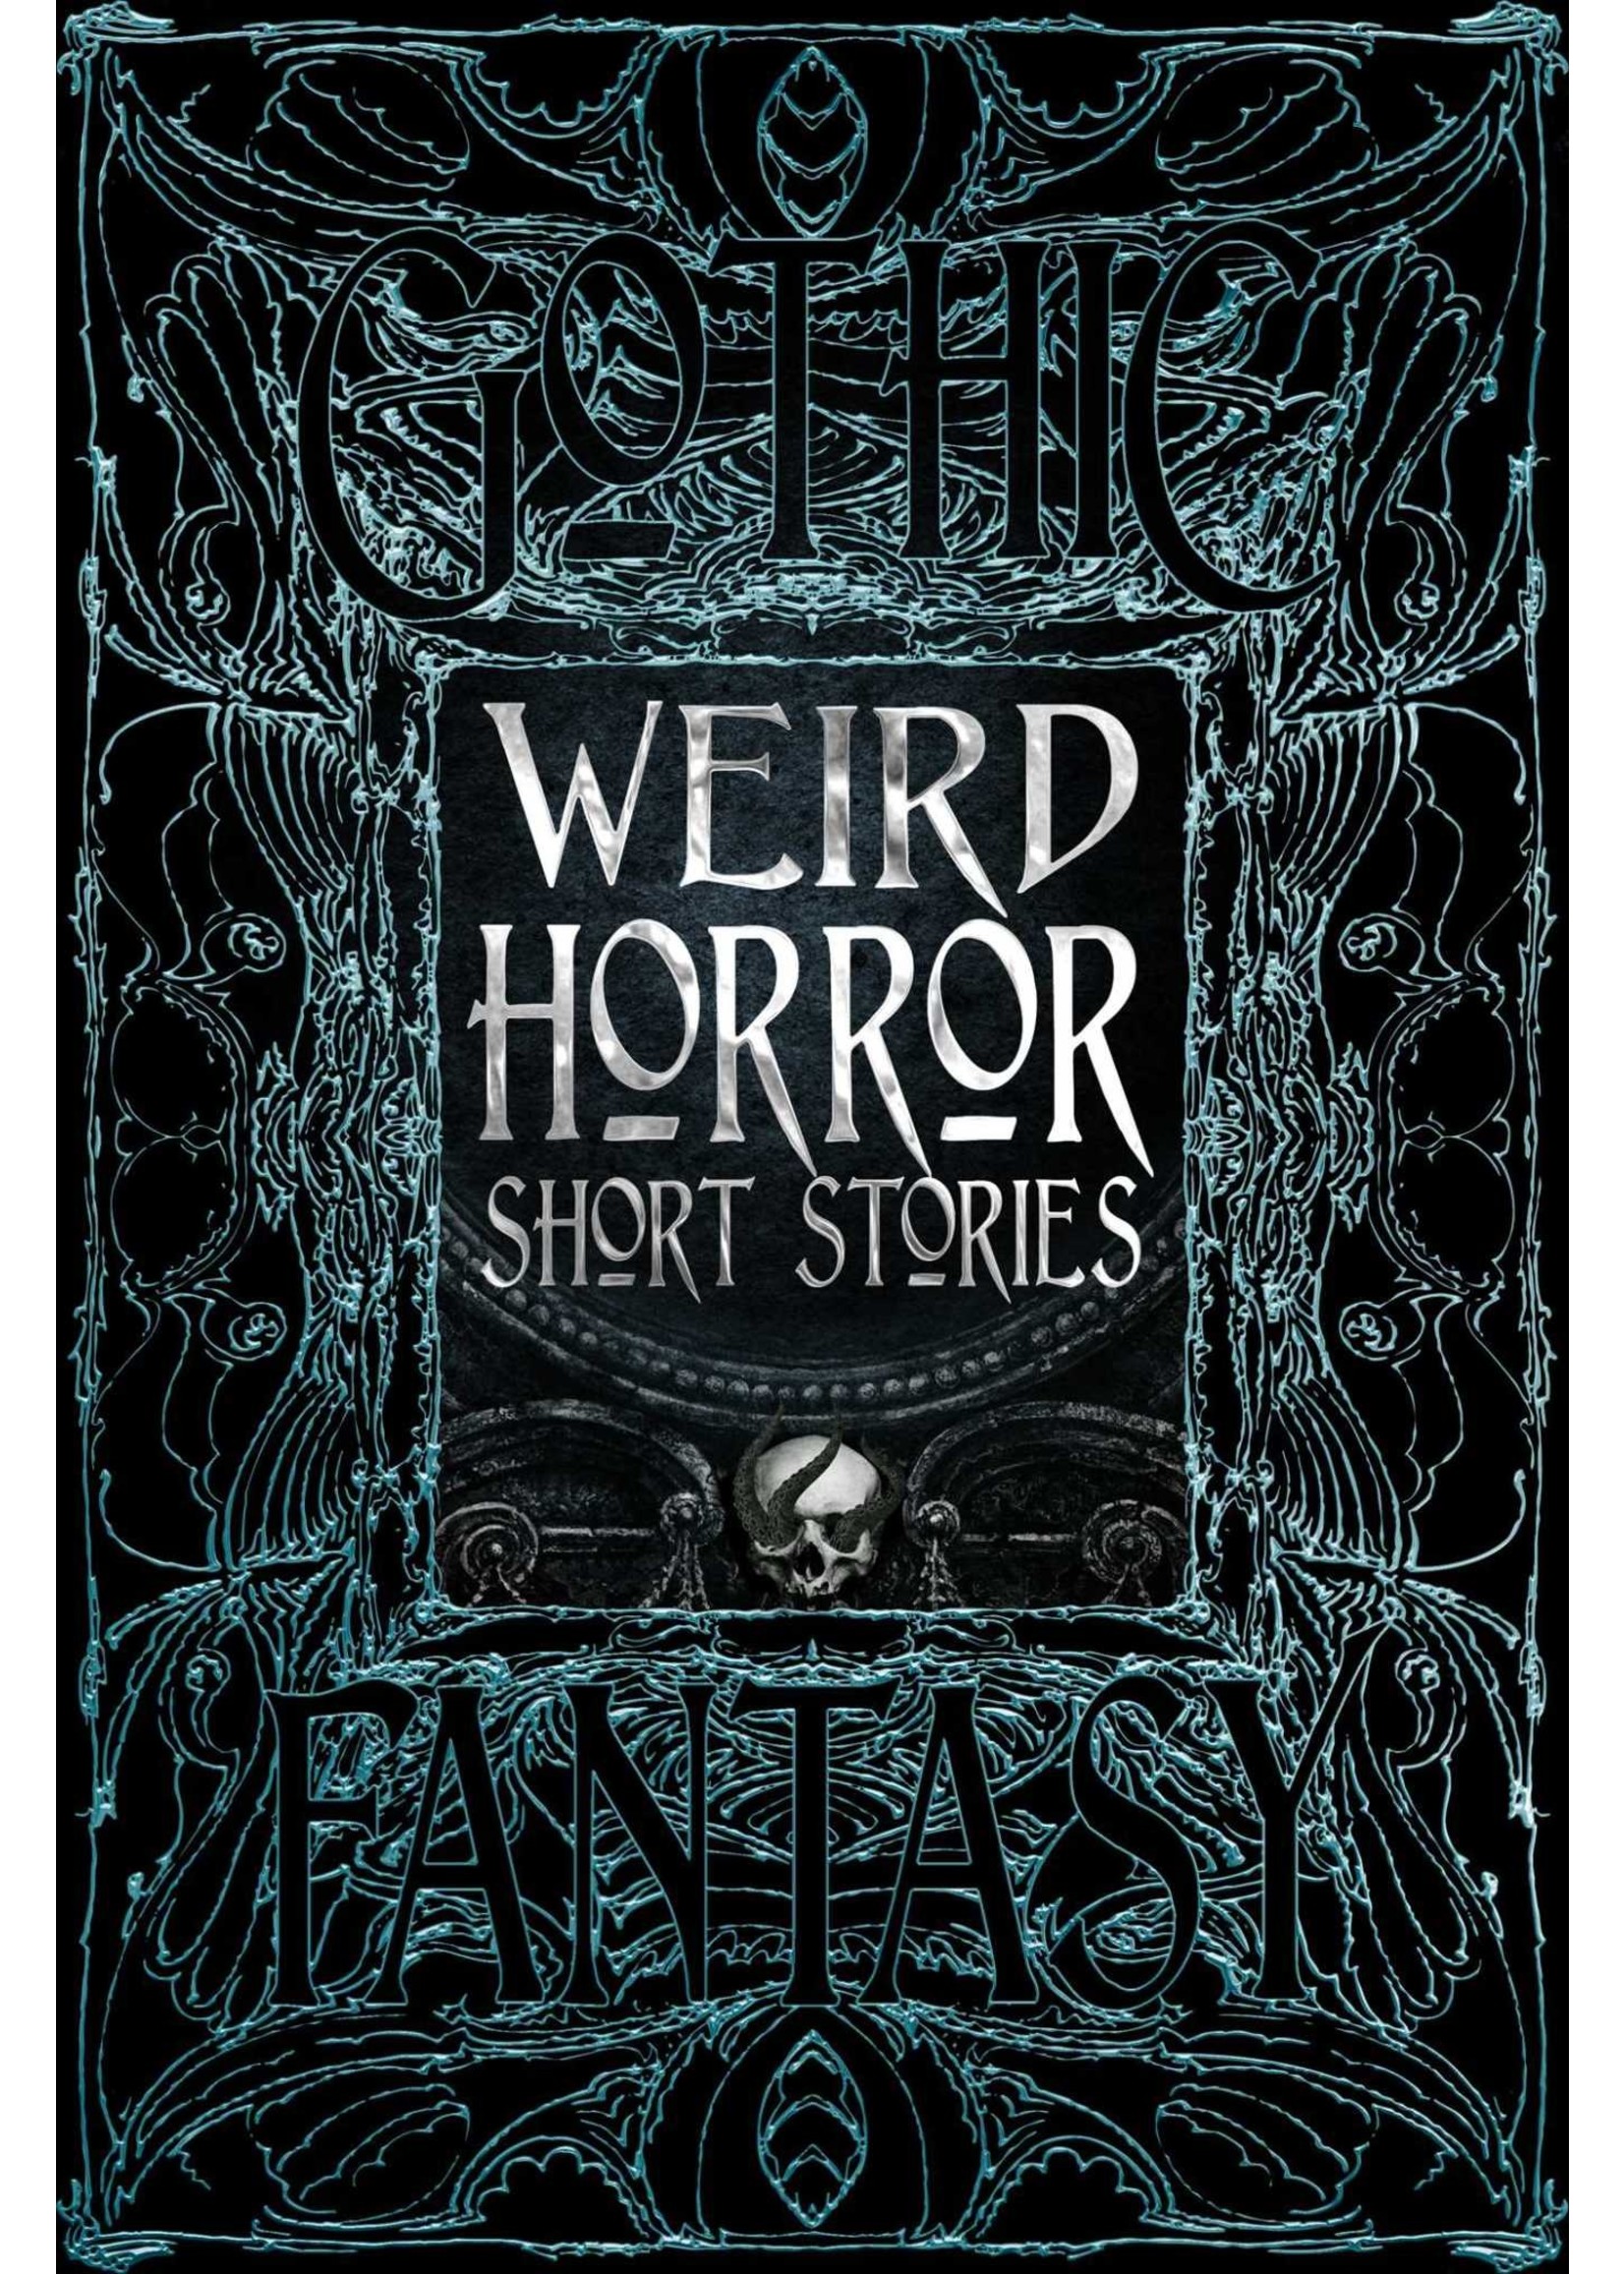 Weird Horror Short Stories by Flame Tree Studio